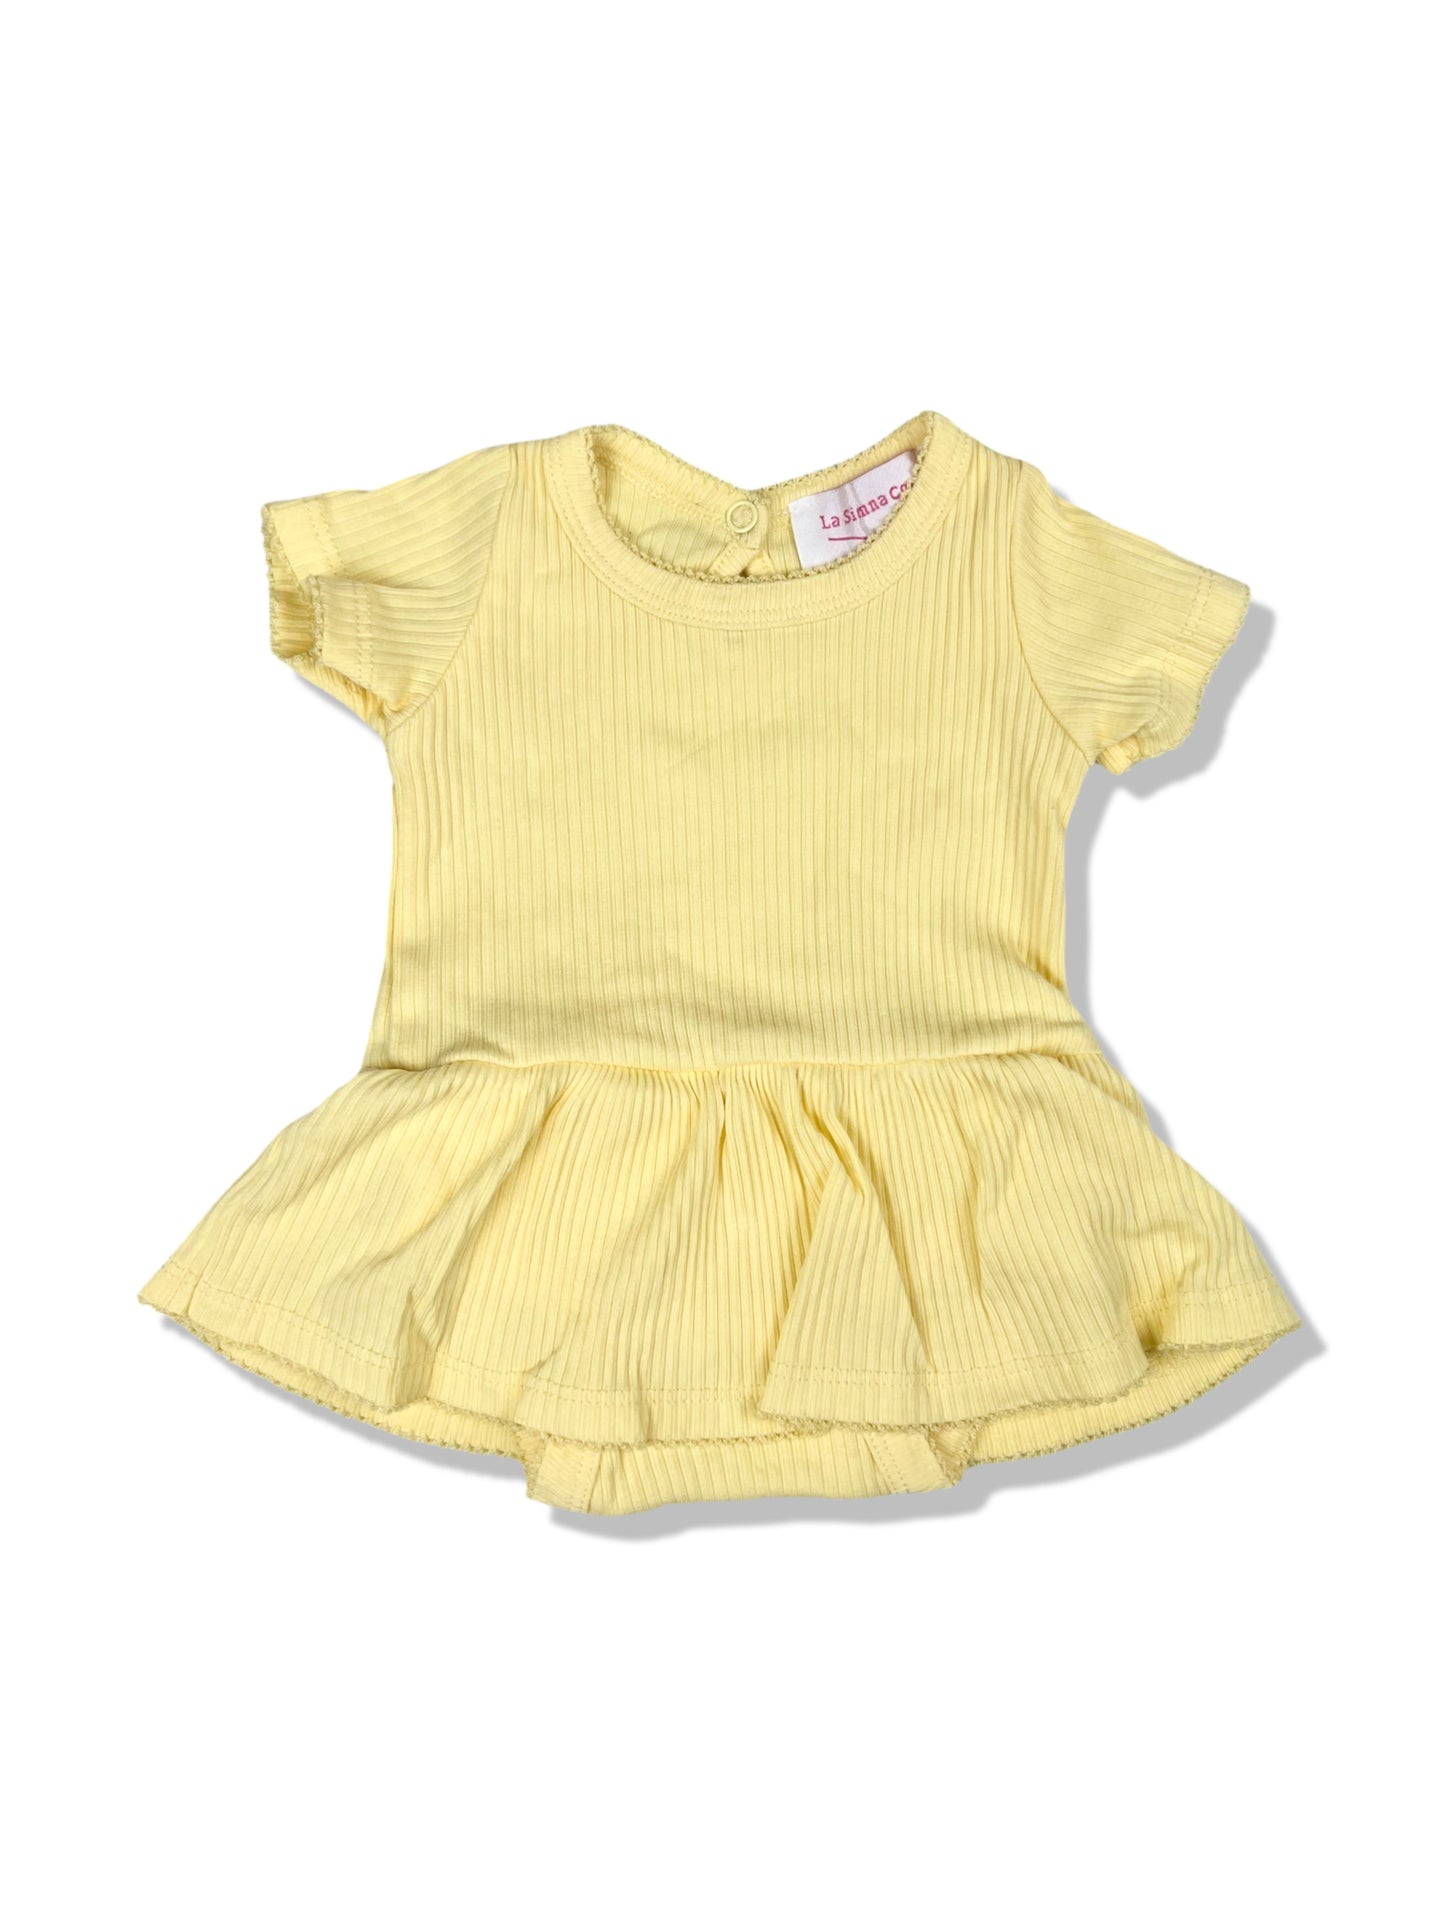 La Sienna Couture Yellow Cozy SS Darling Dress - Size 000